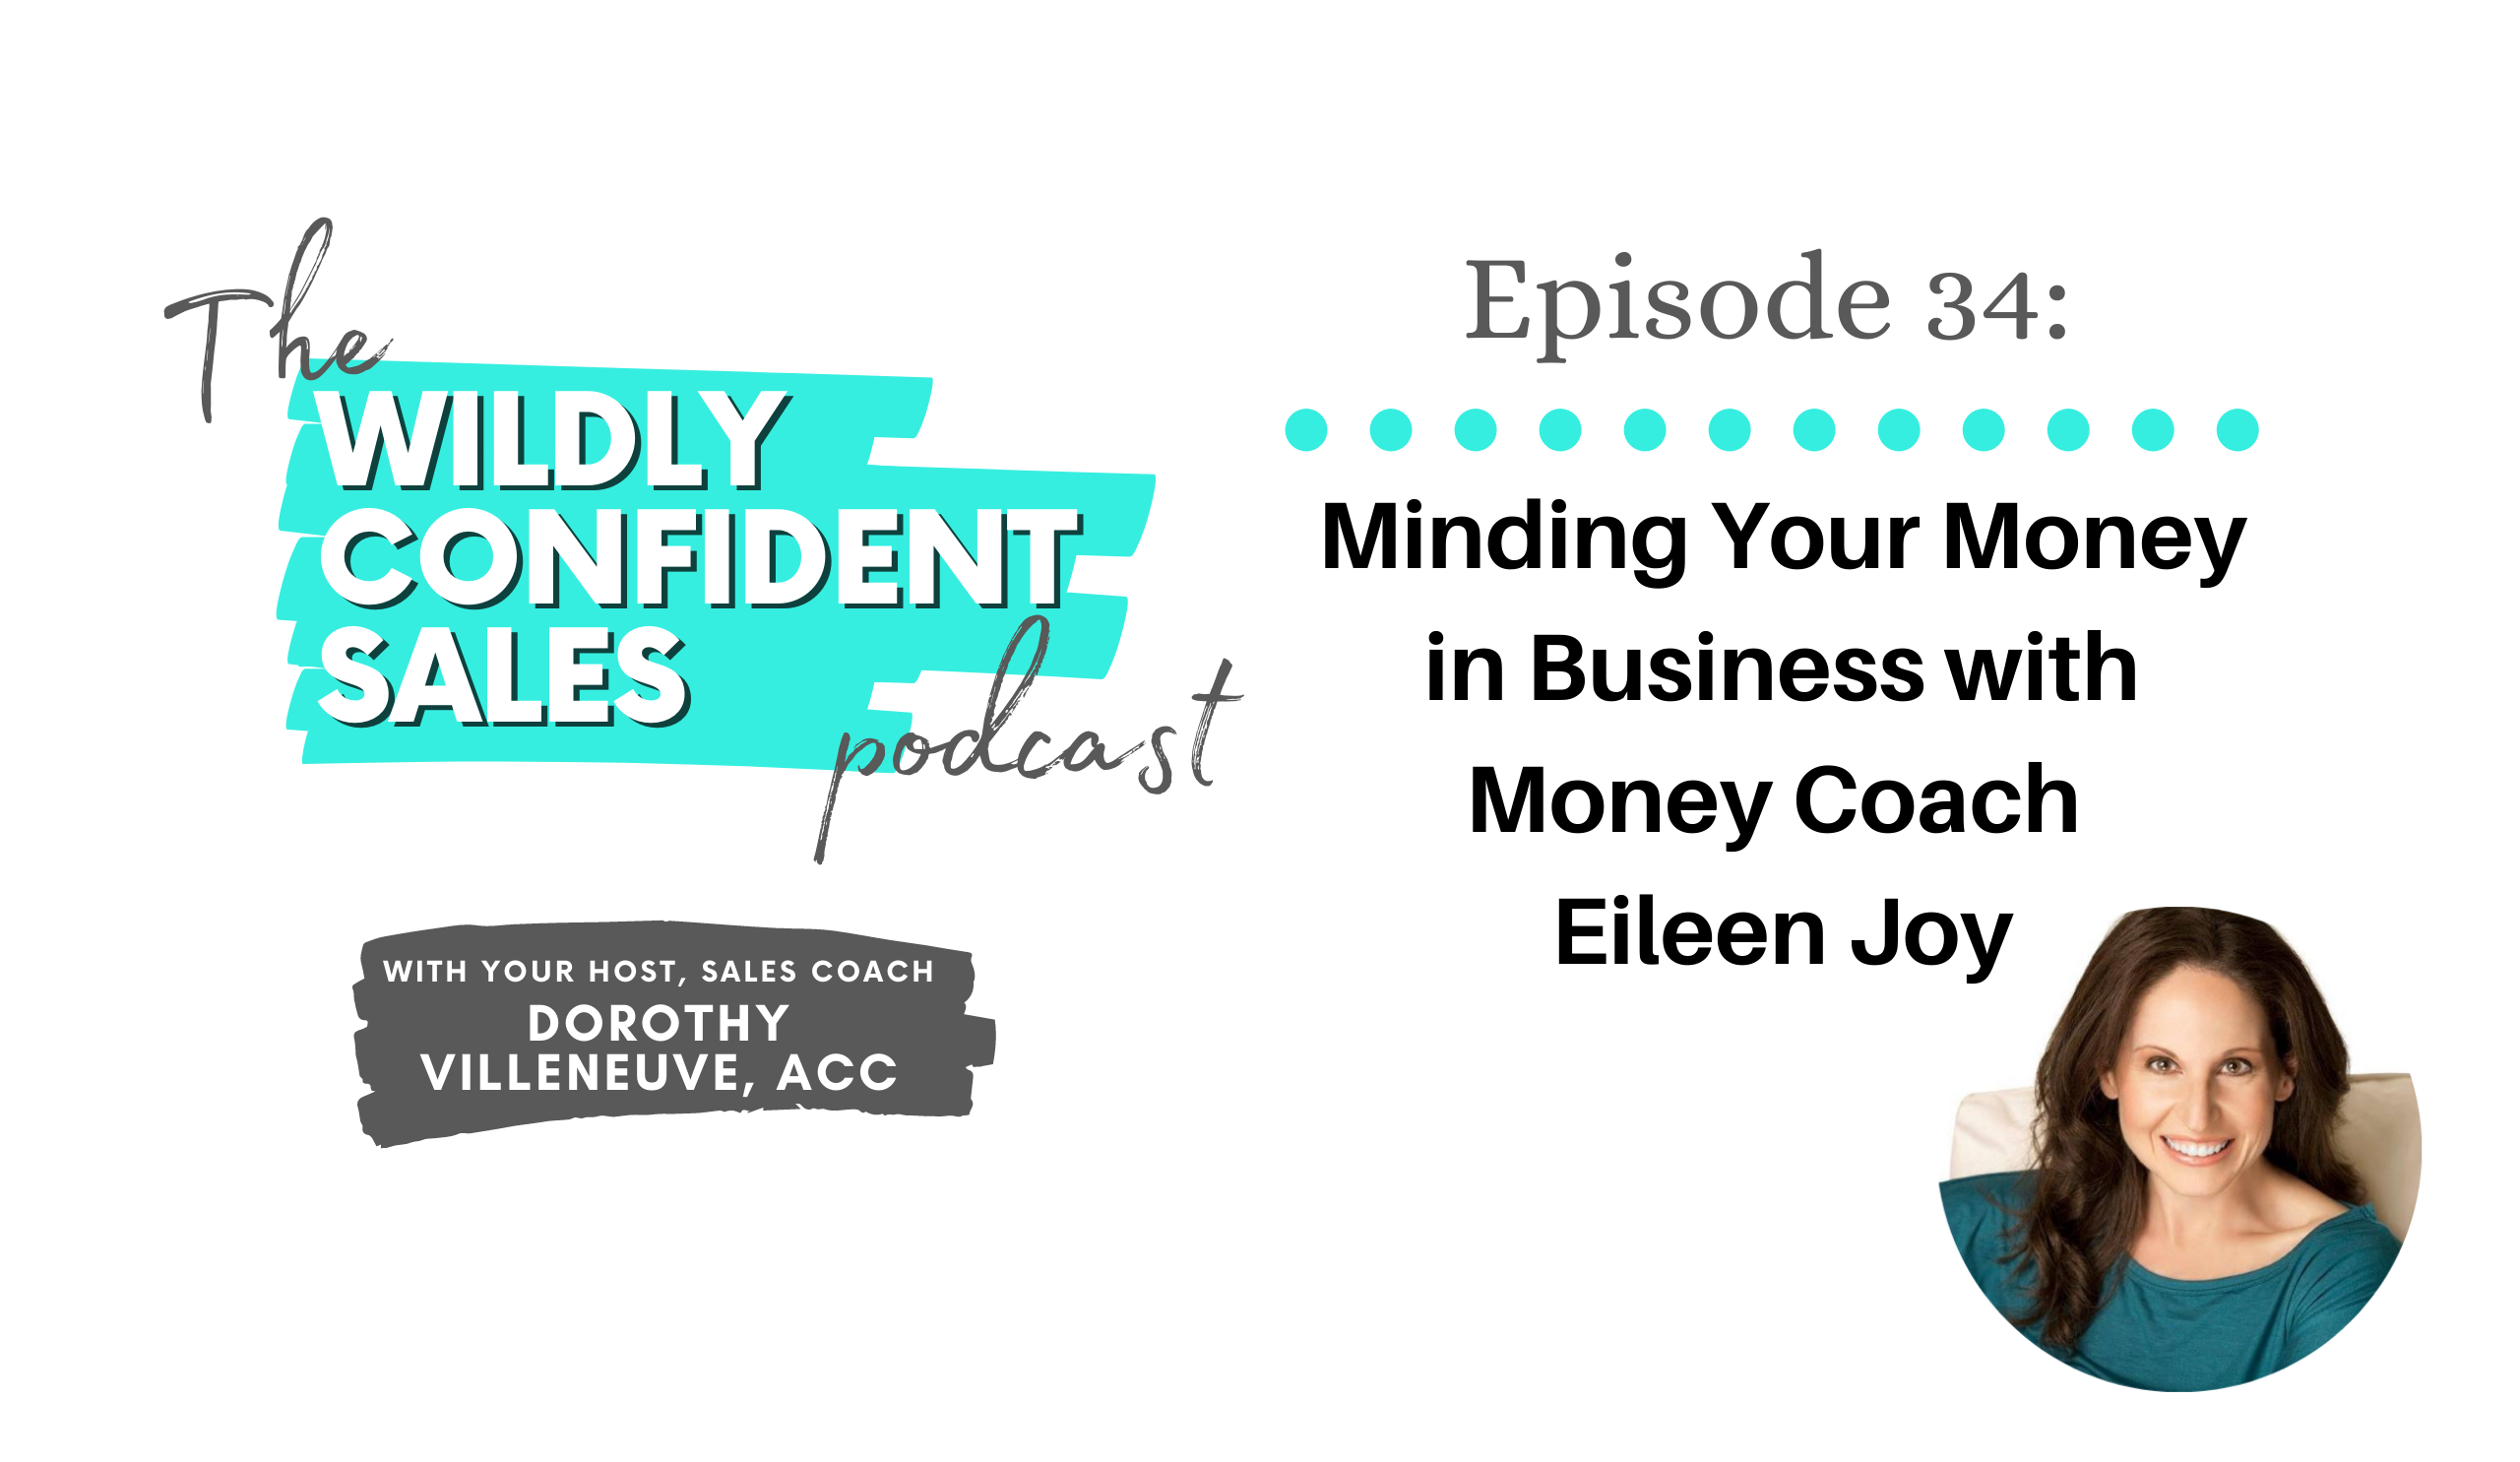 Minding Your Money in Business with Money Coach Eileen Joy